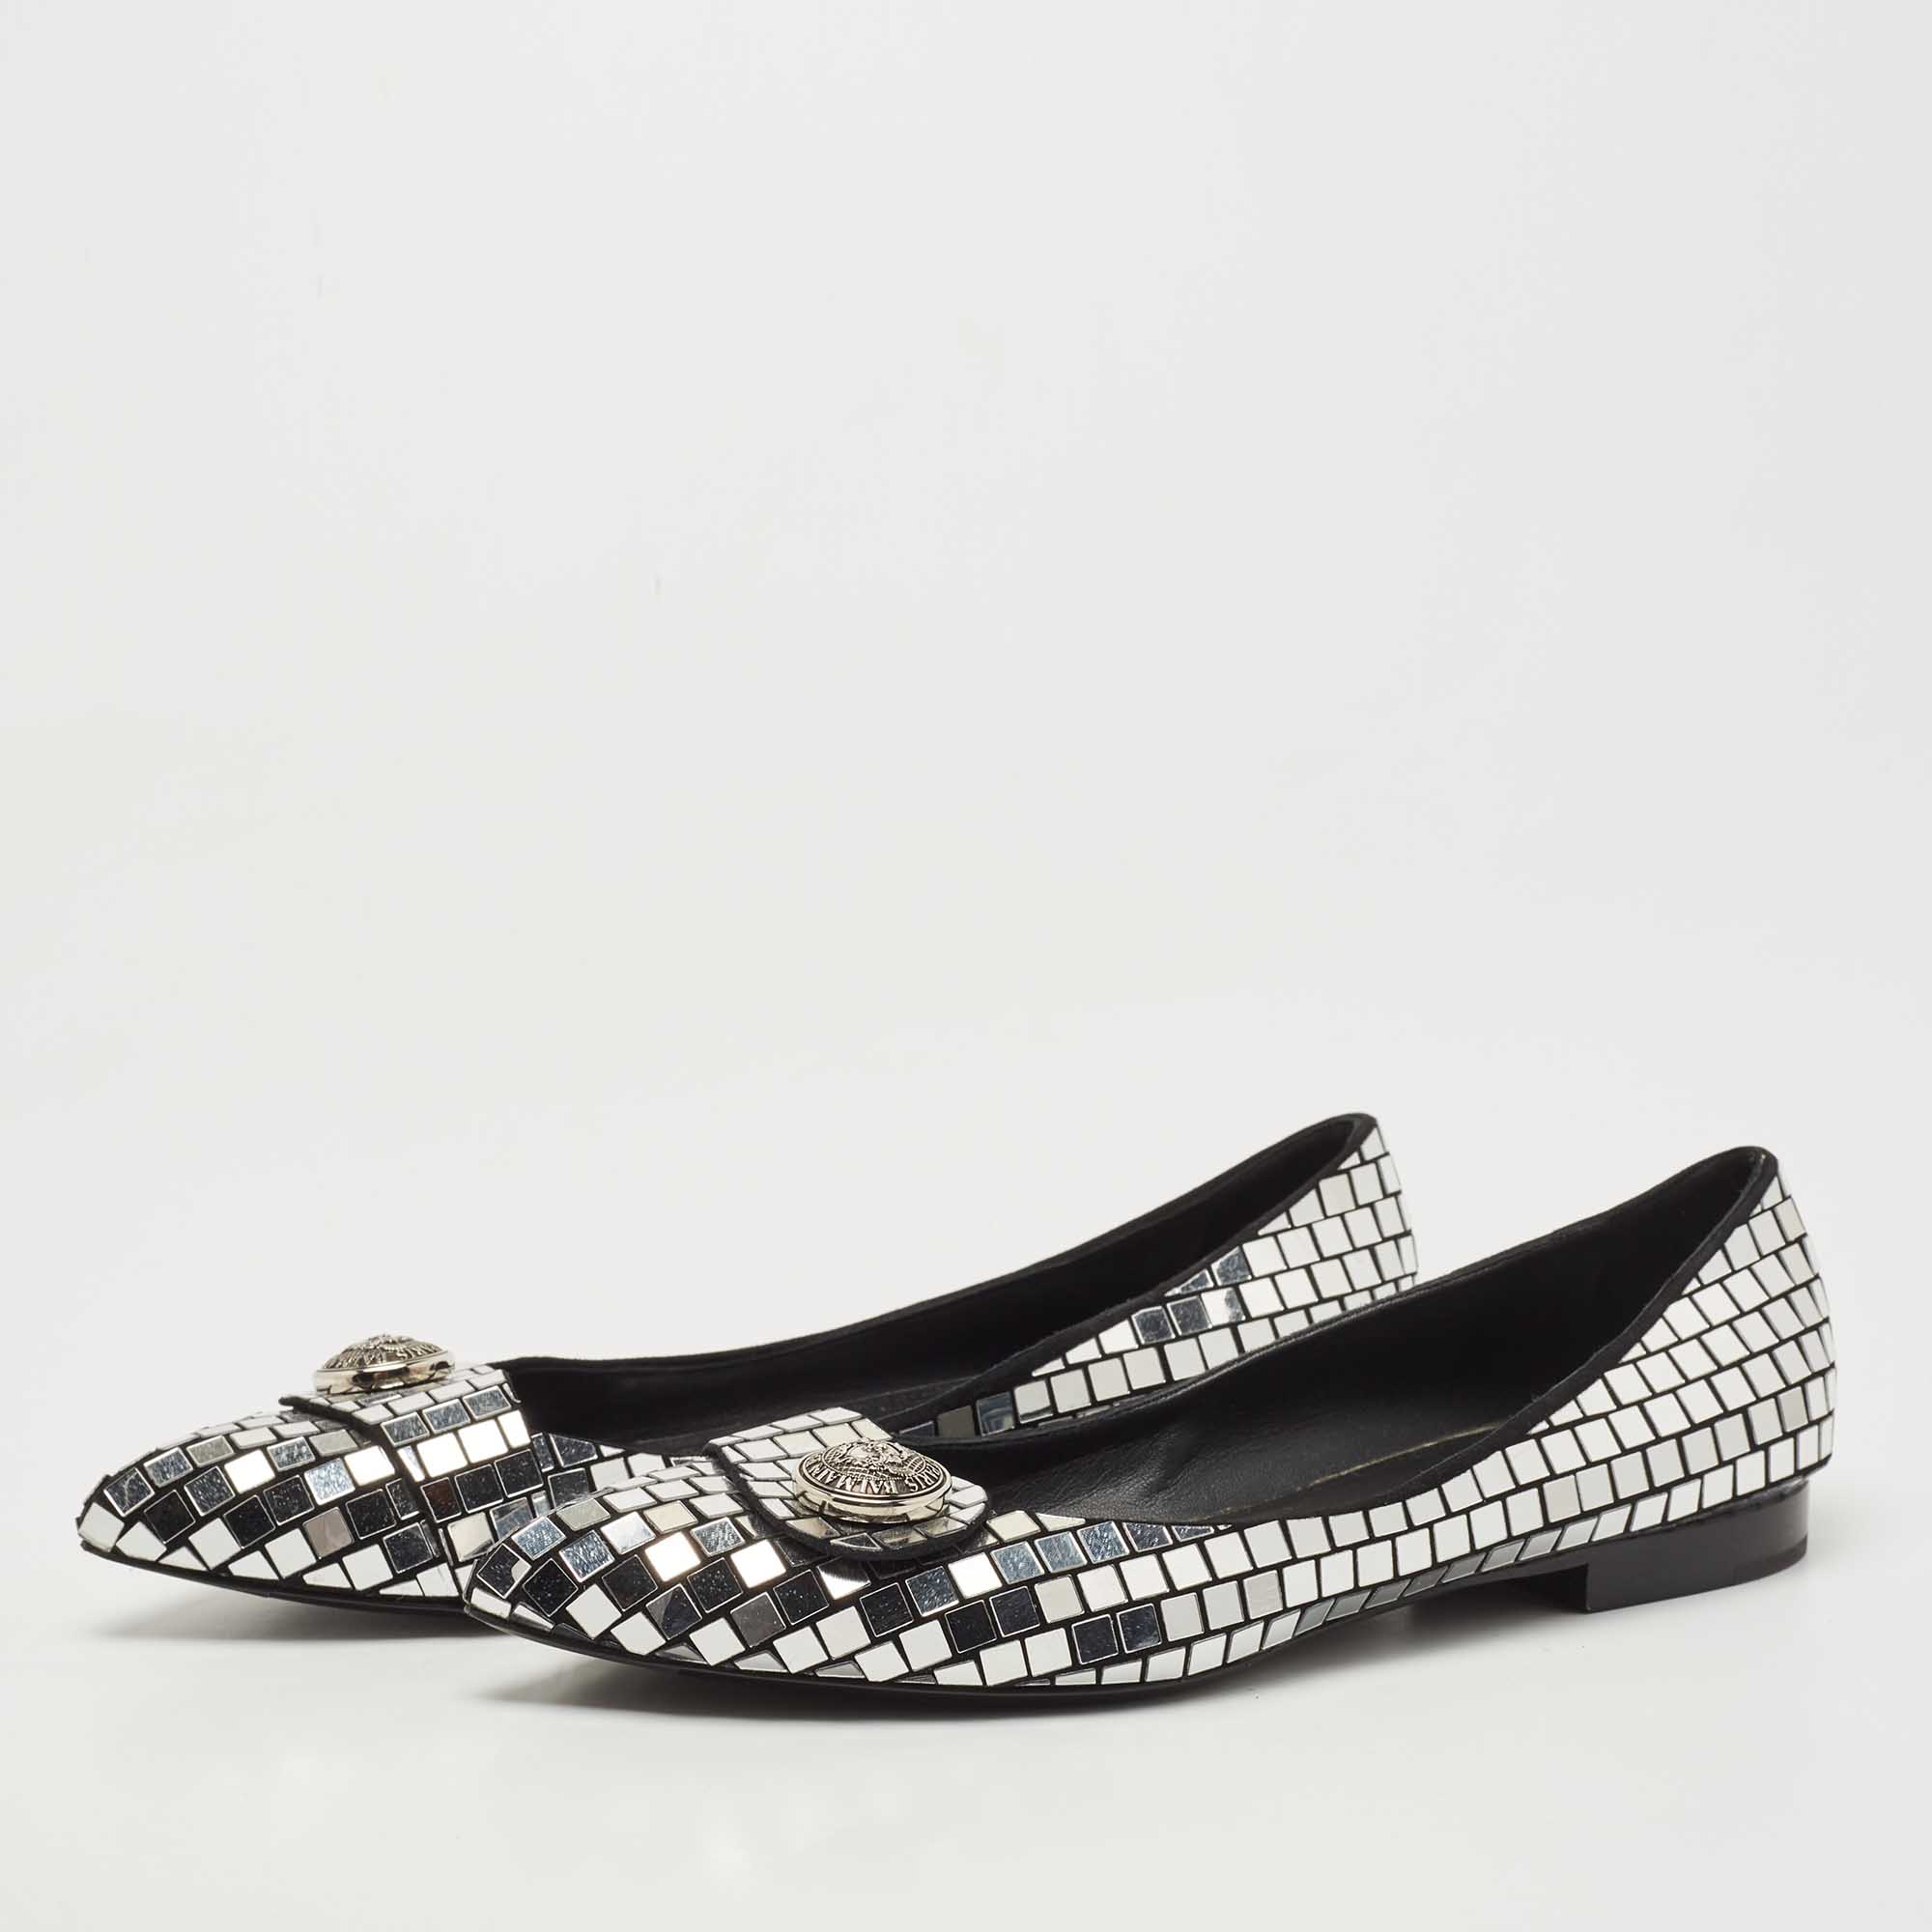 

Balmain Silver/Black Suede and Embellished Ballet Flats Size